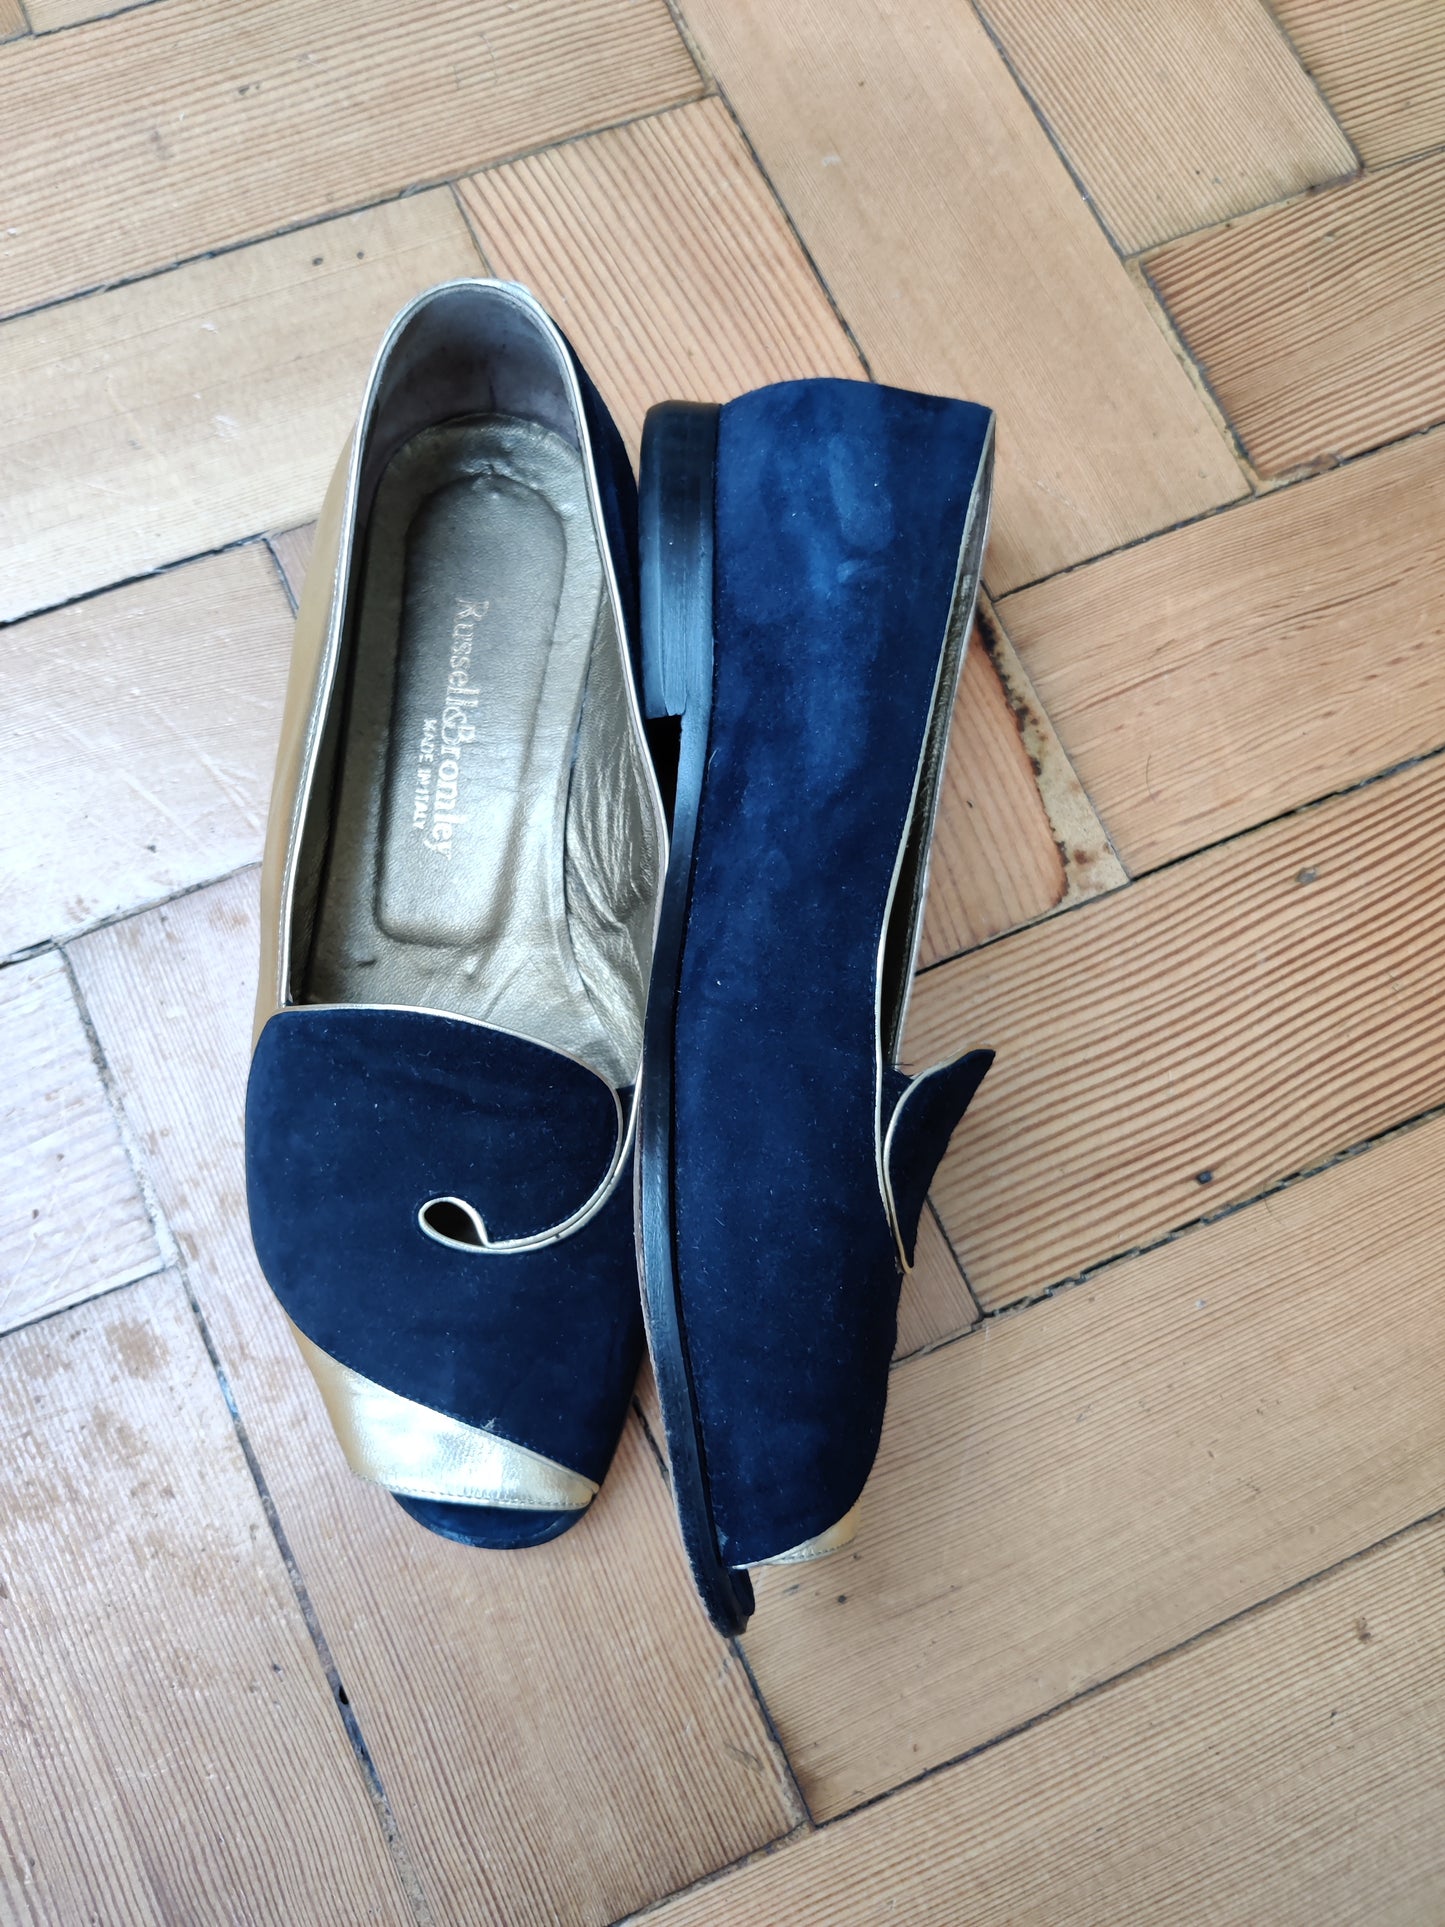 Russell & Bromley shoes 4.5